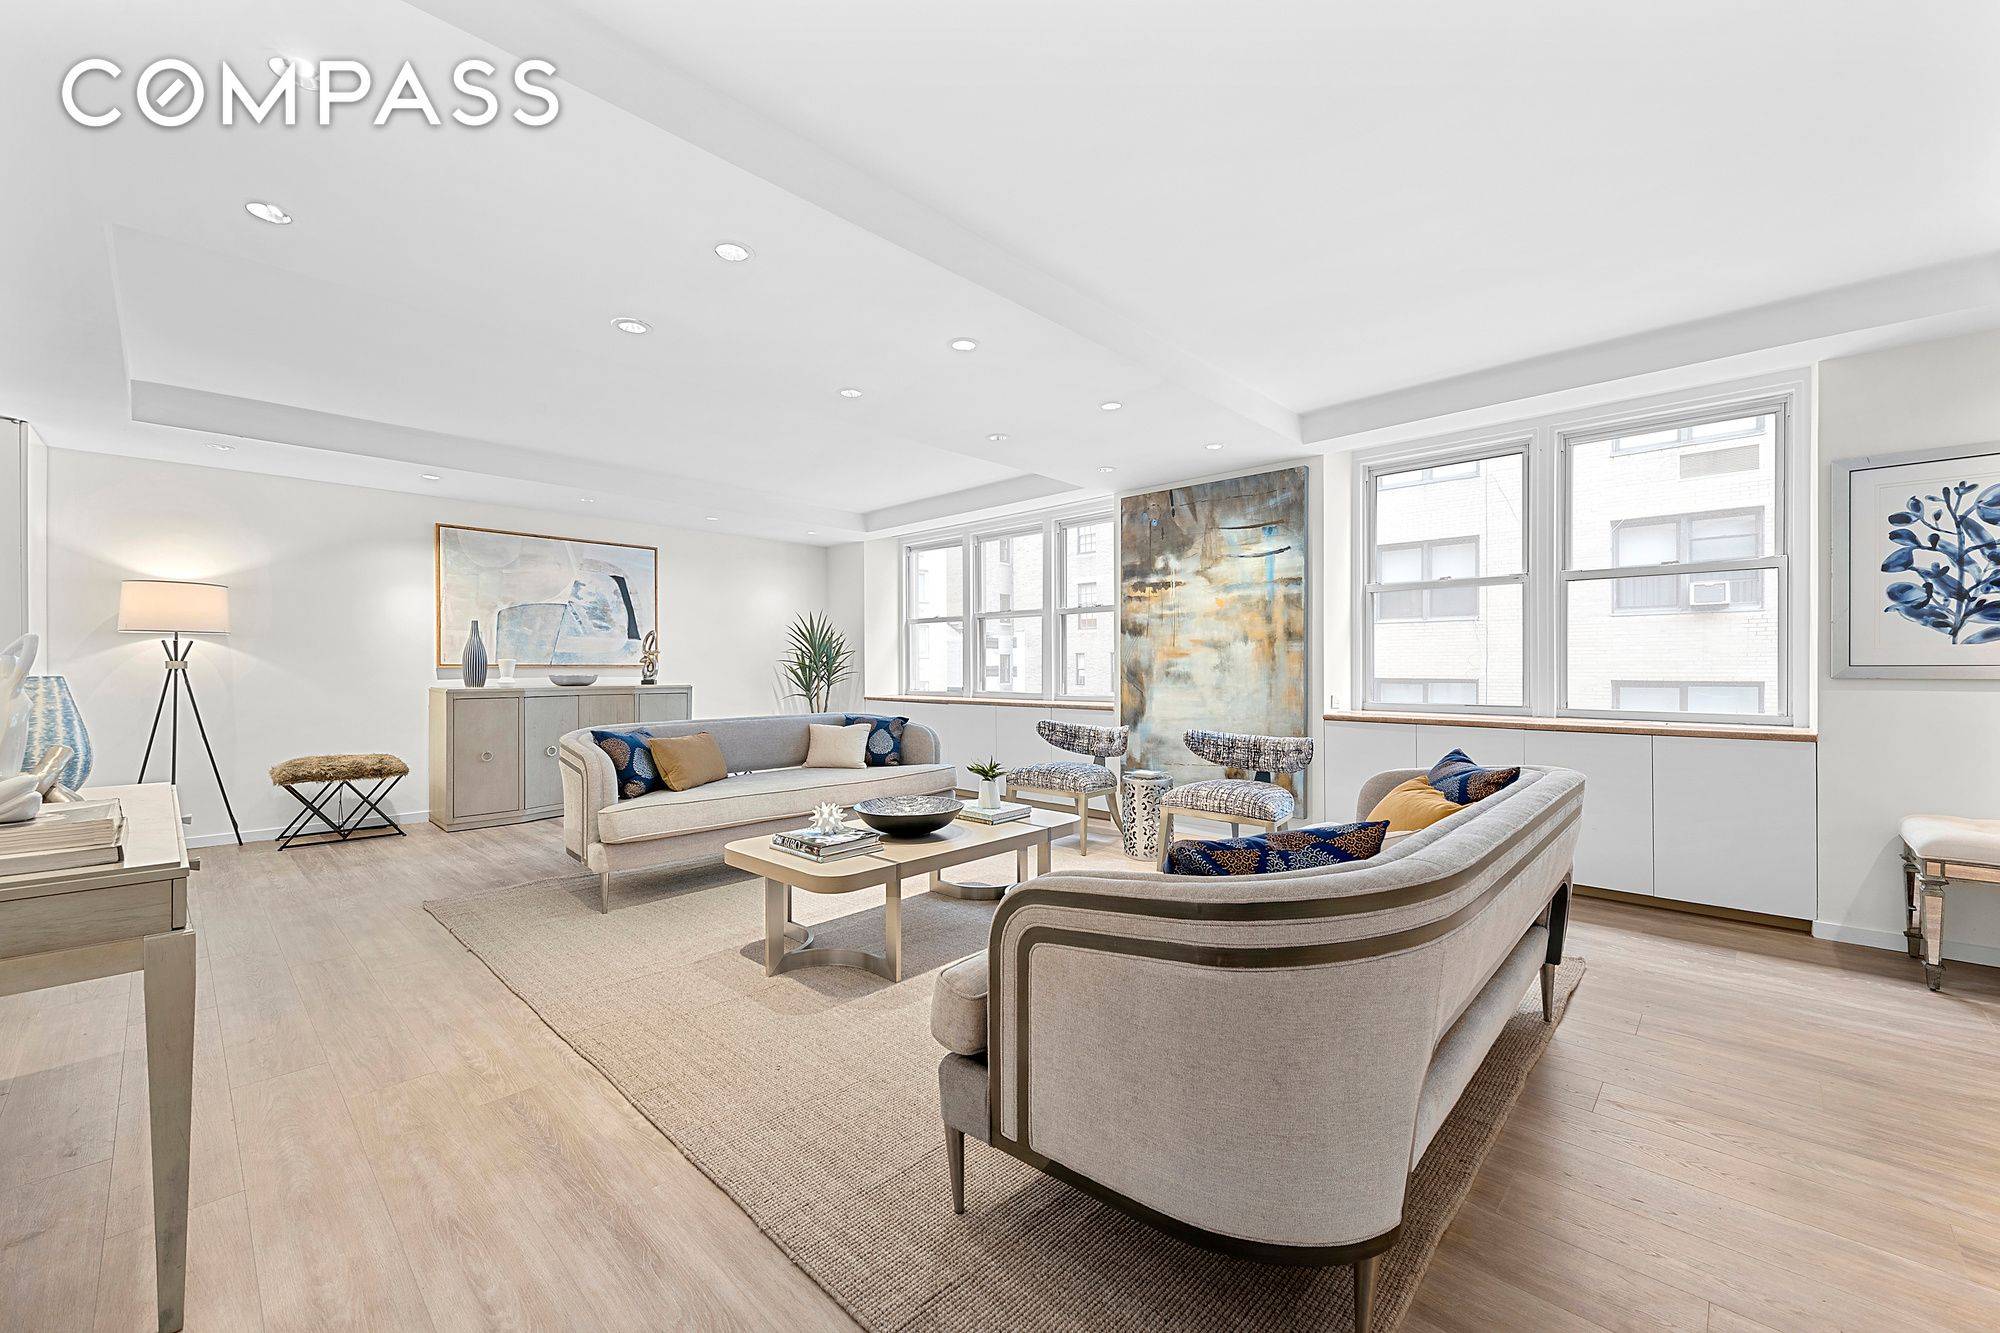 This sprawling duplex residence is in an ideal location off Fifth Avenue just moments from Central Park.